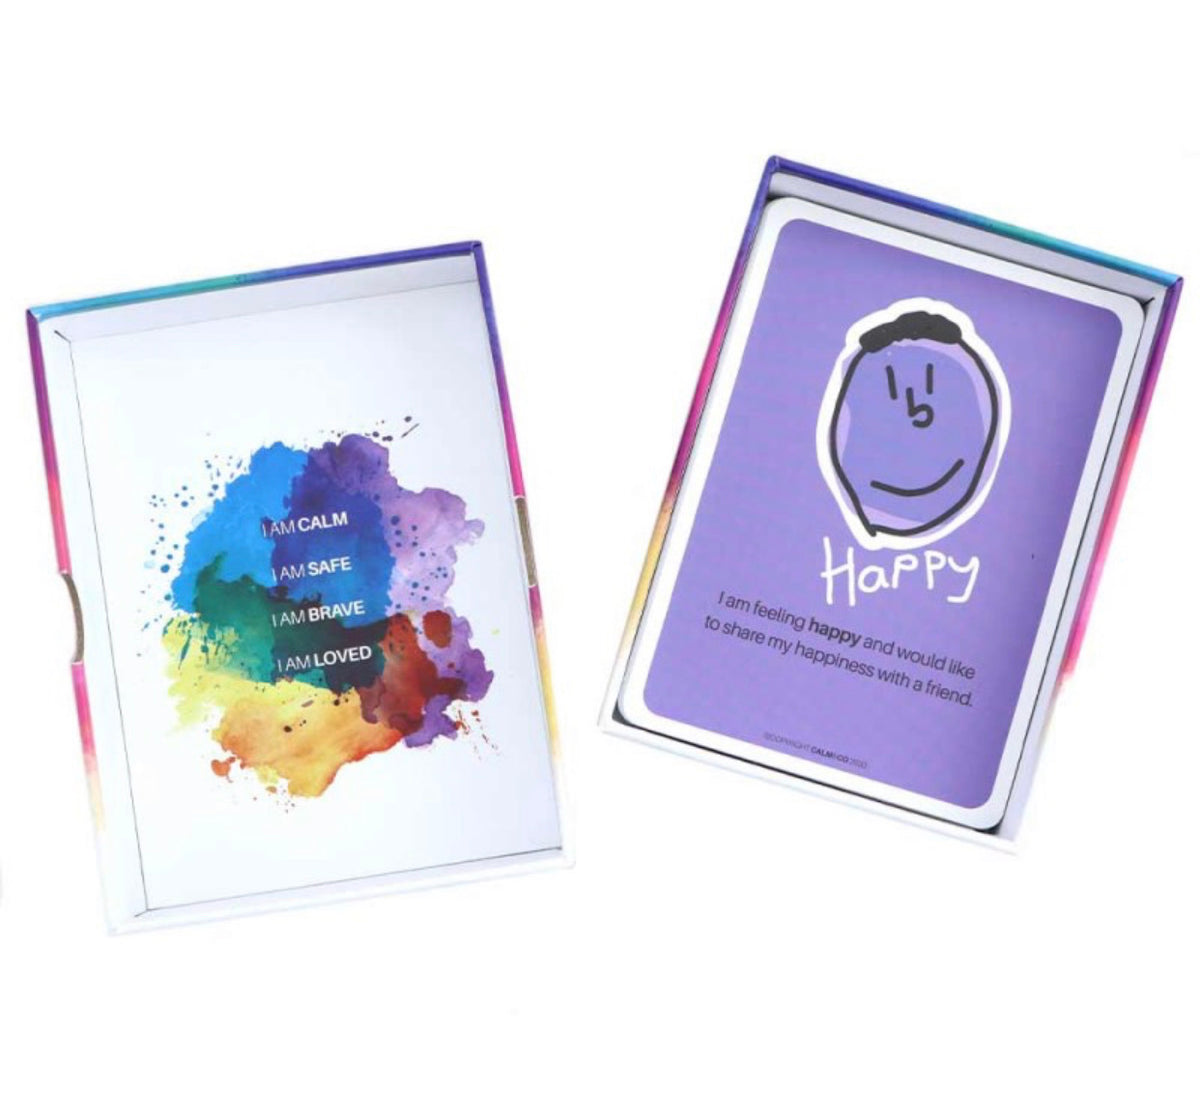 Mantra Cards | Emotionology - Emotion Cards to Explore Emotions with Children